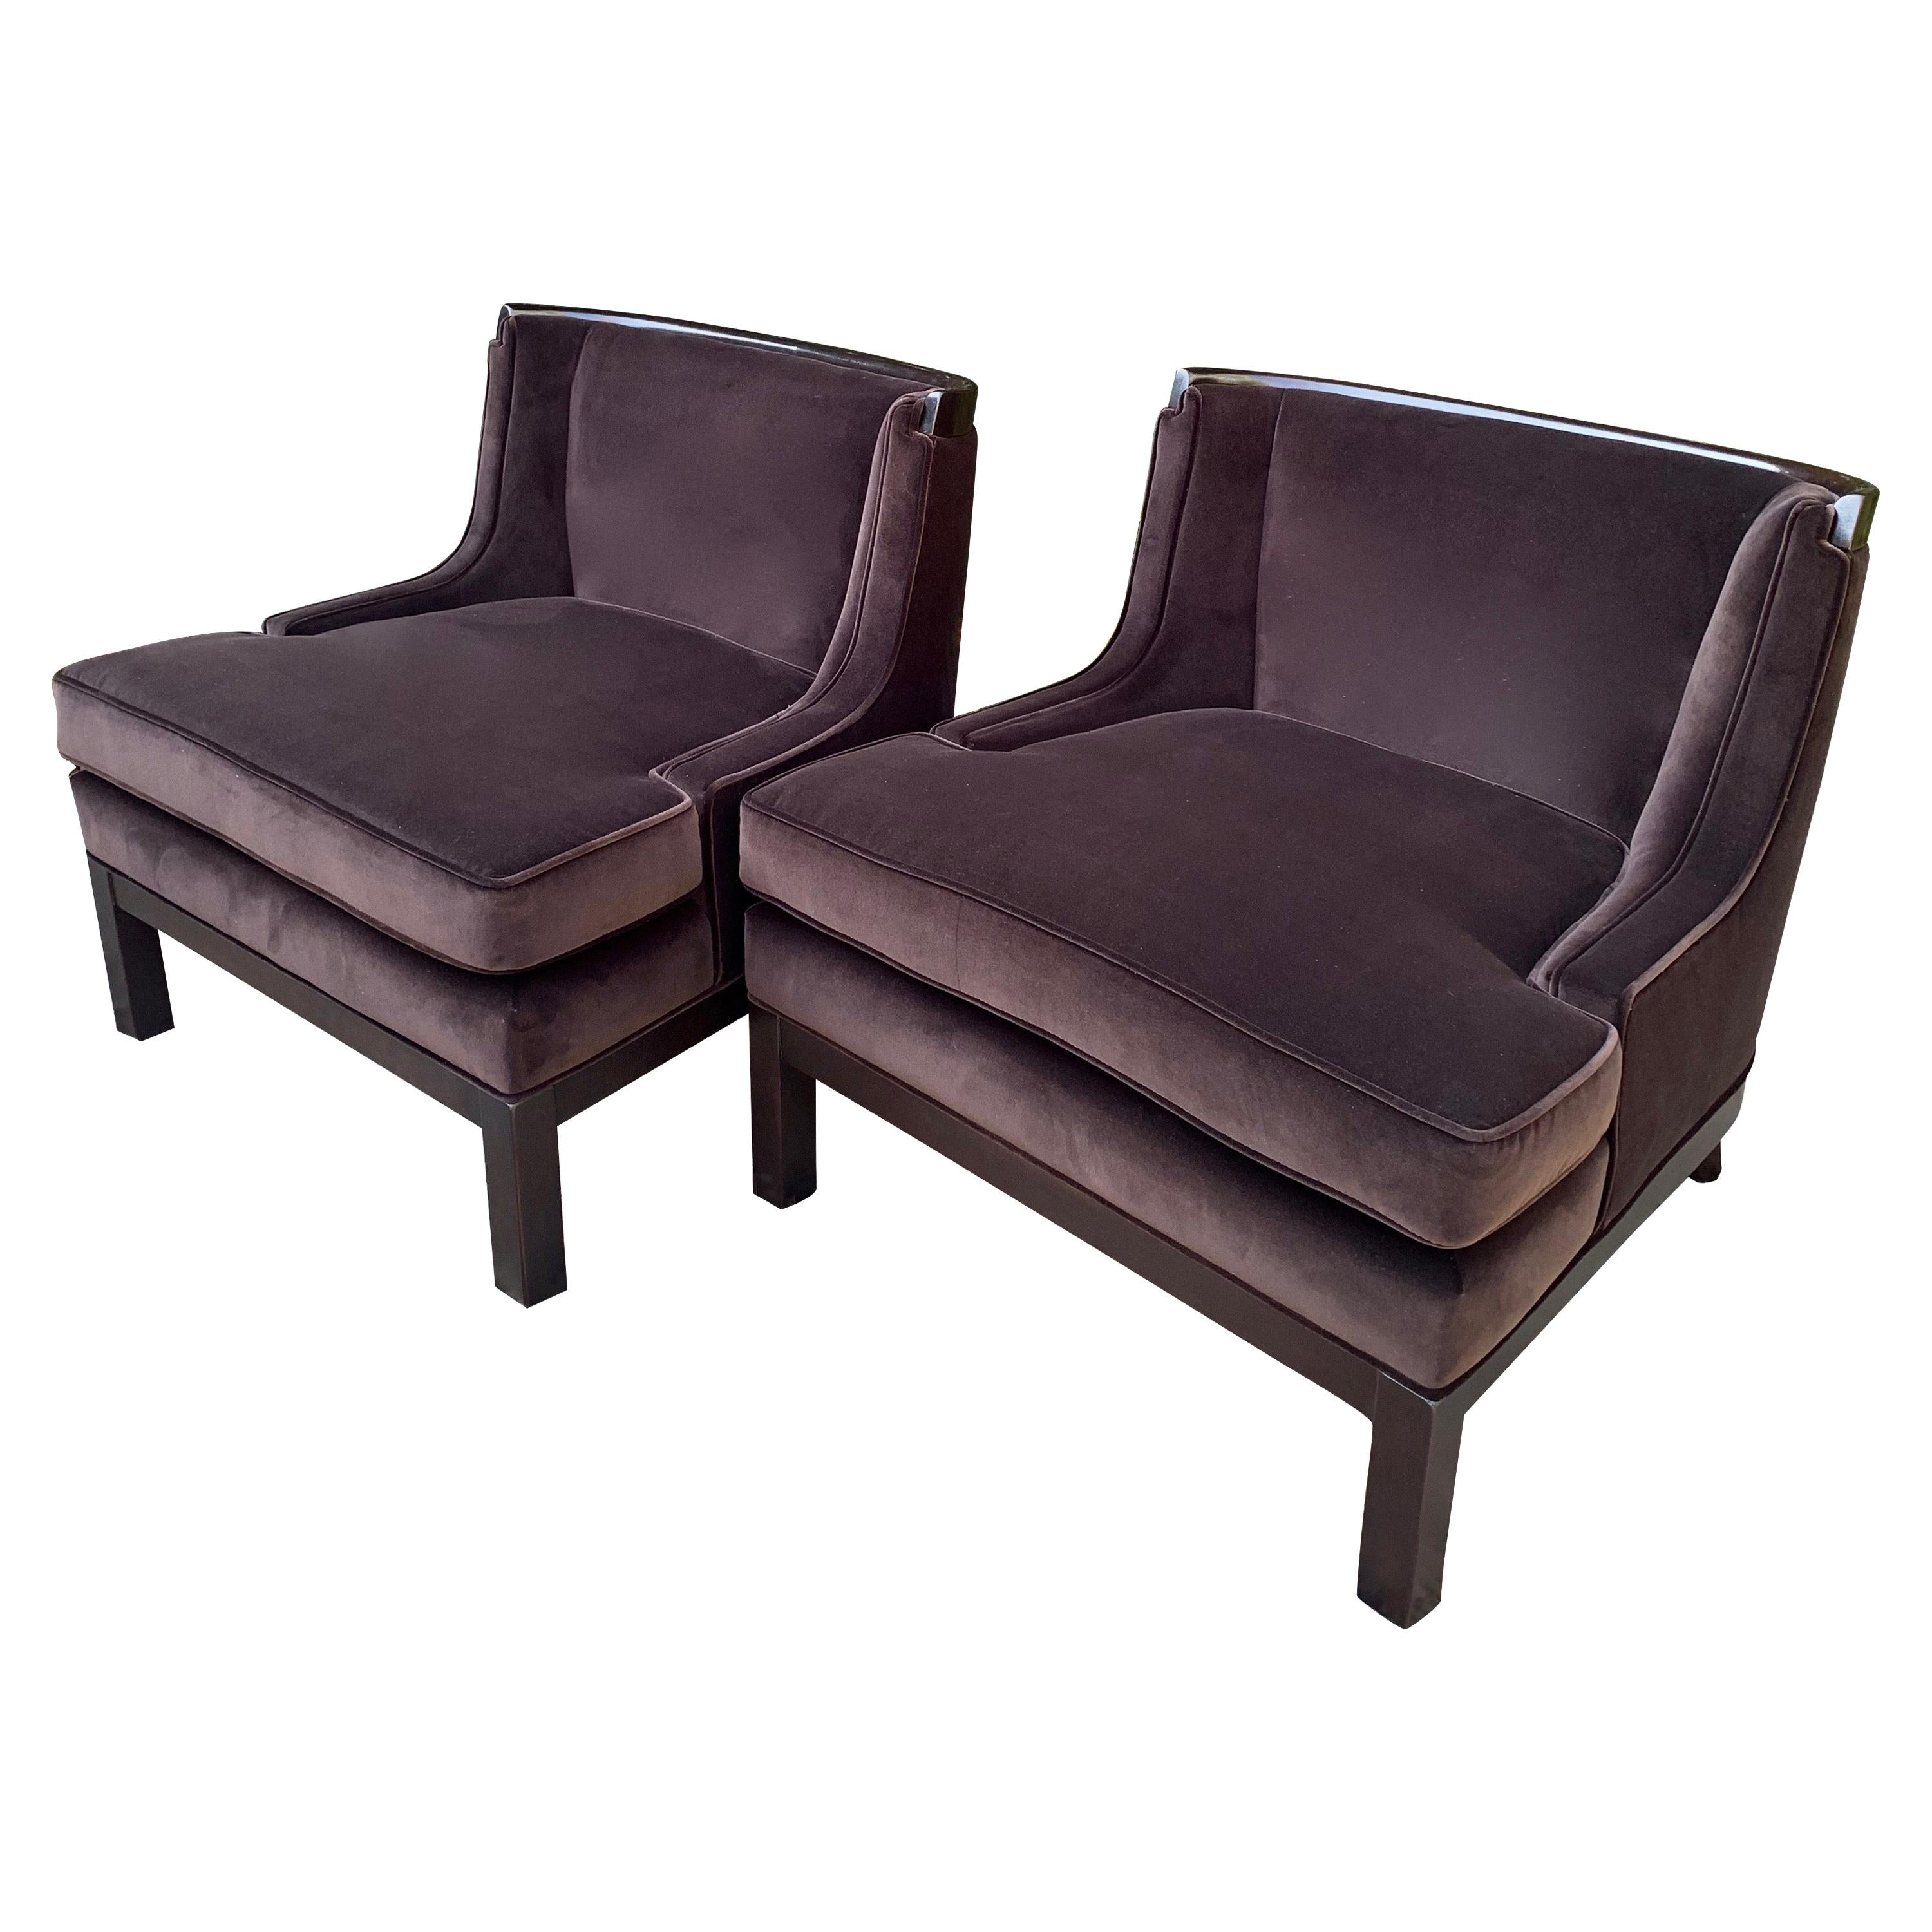 Pair of Tomlinson Style Chairs in Brown Mohair